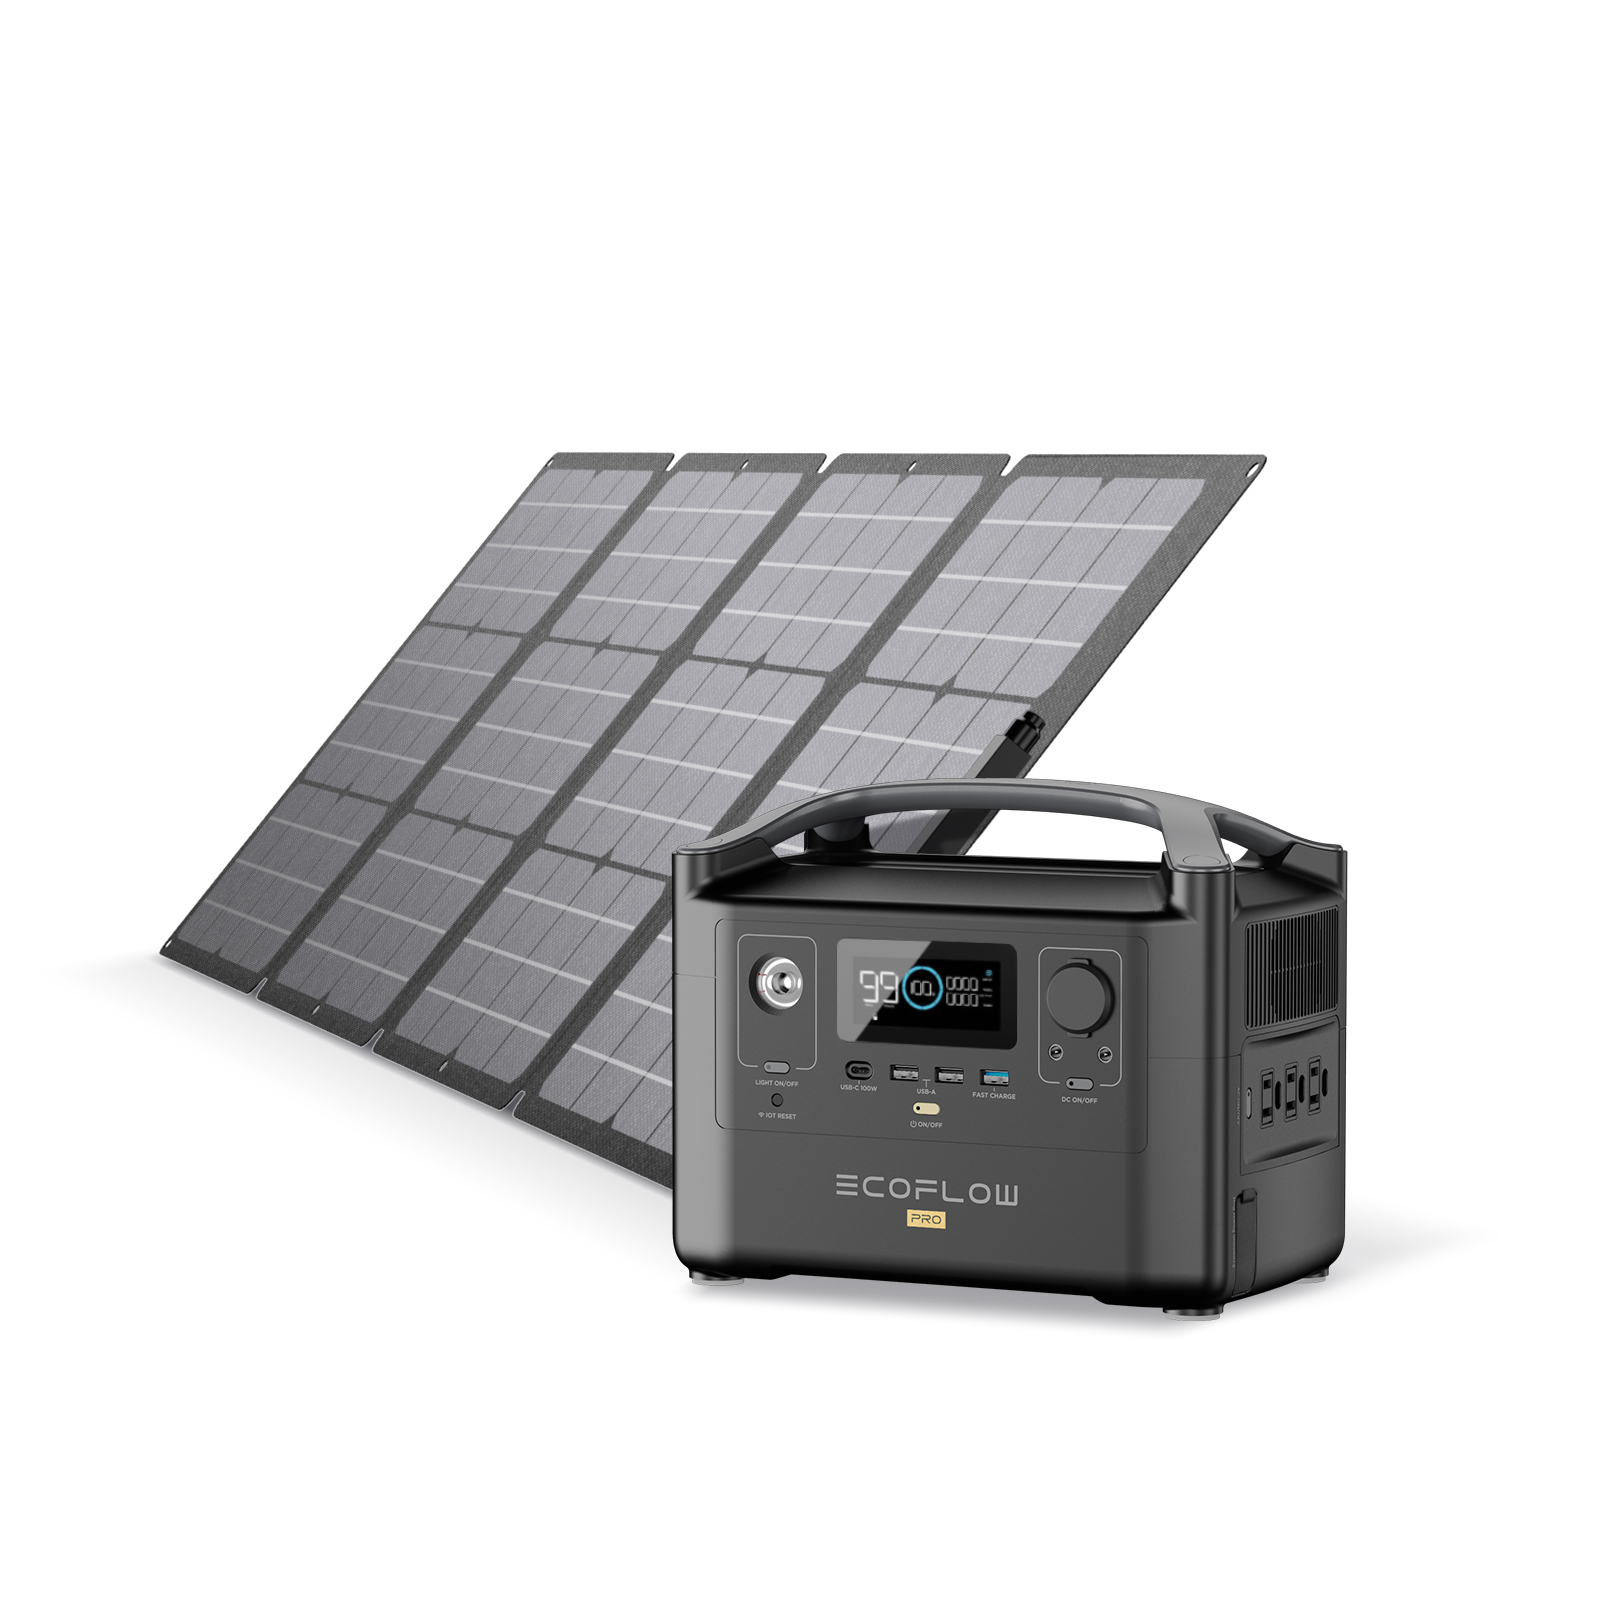 6 Best Solar Generators for OffGrid Living in 2022 Reviewed